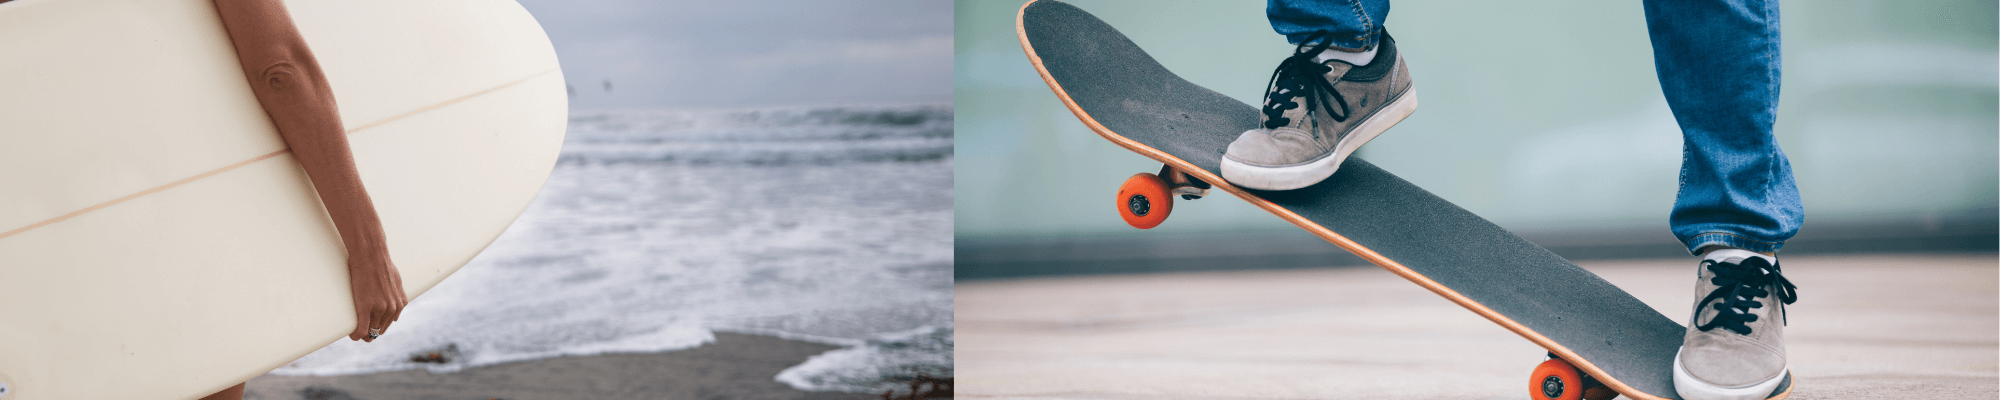 surf and skate boards